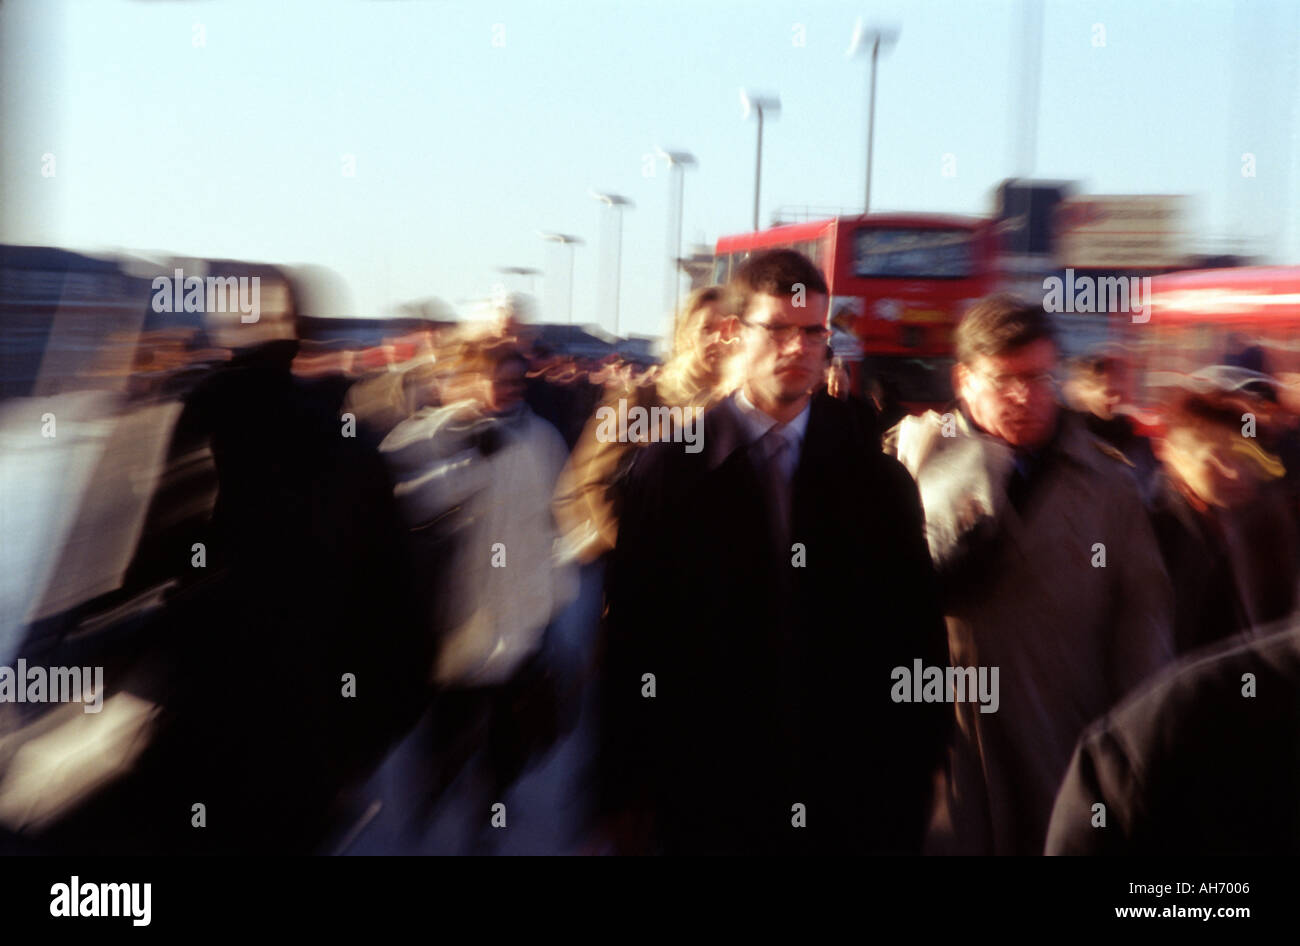 People rushing to work or home in London Stock Photo